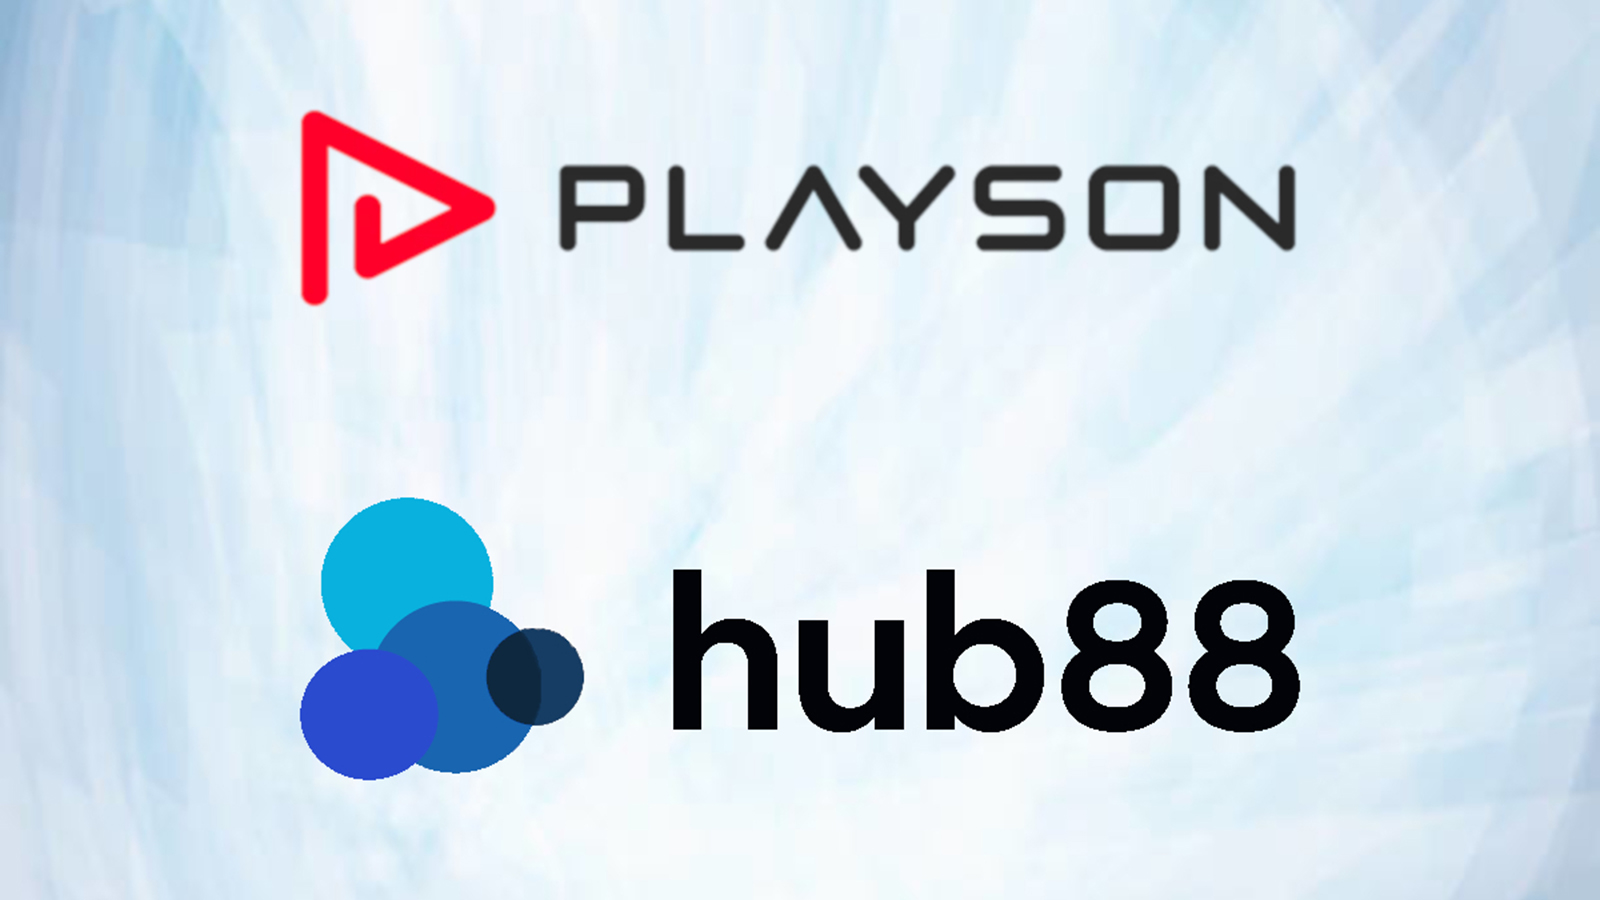 Playson's Content Integration with Hub88